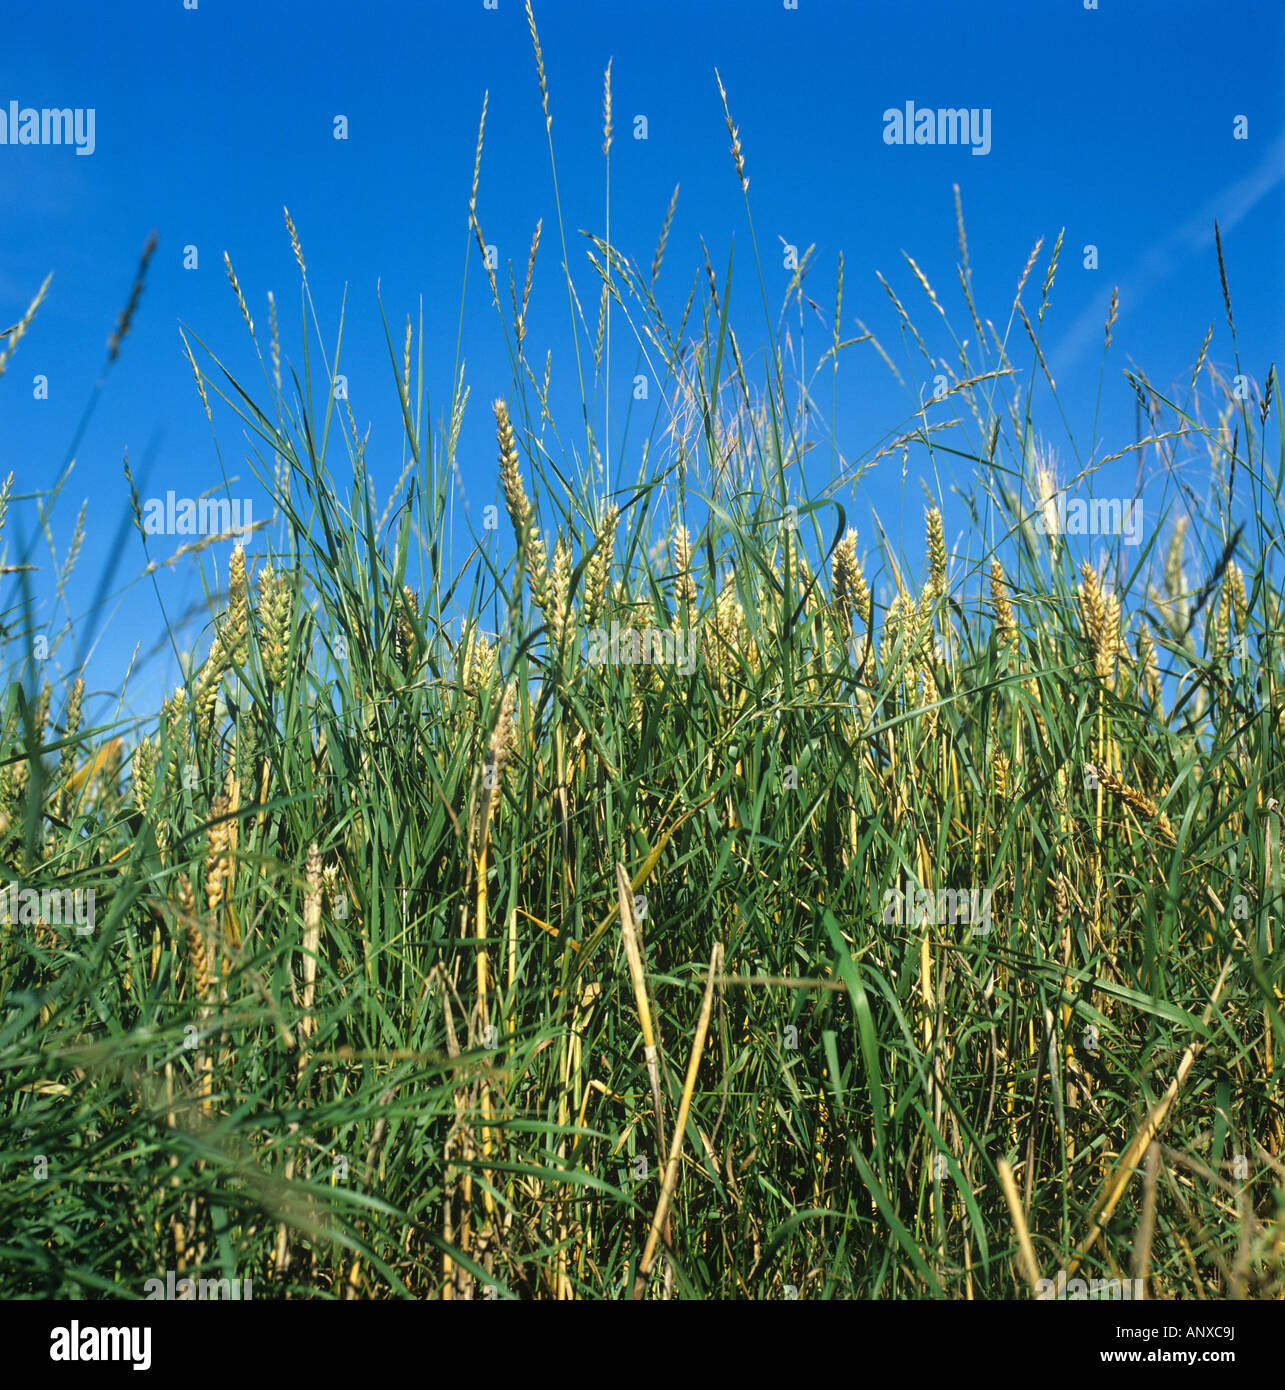 Couch Agropyron repens perennial grass weeds in flowerr in a ripe wheat crop Stock Photo